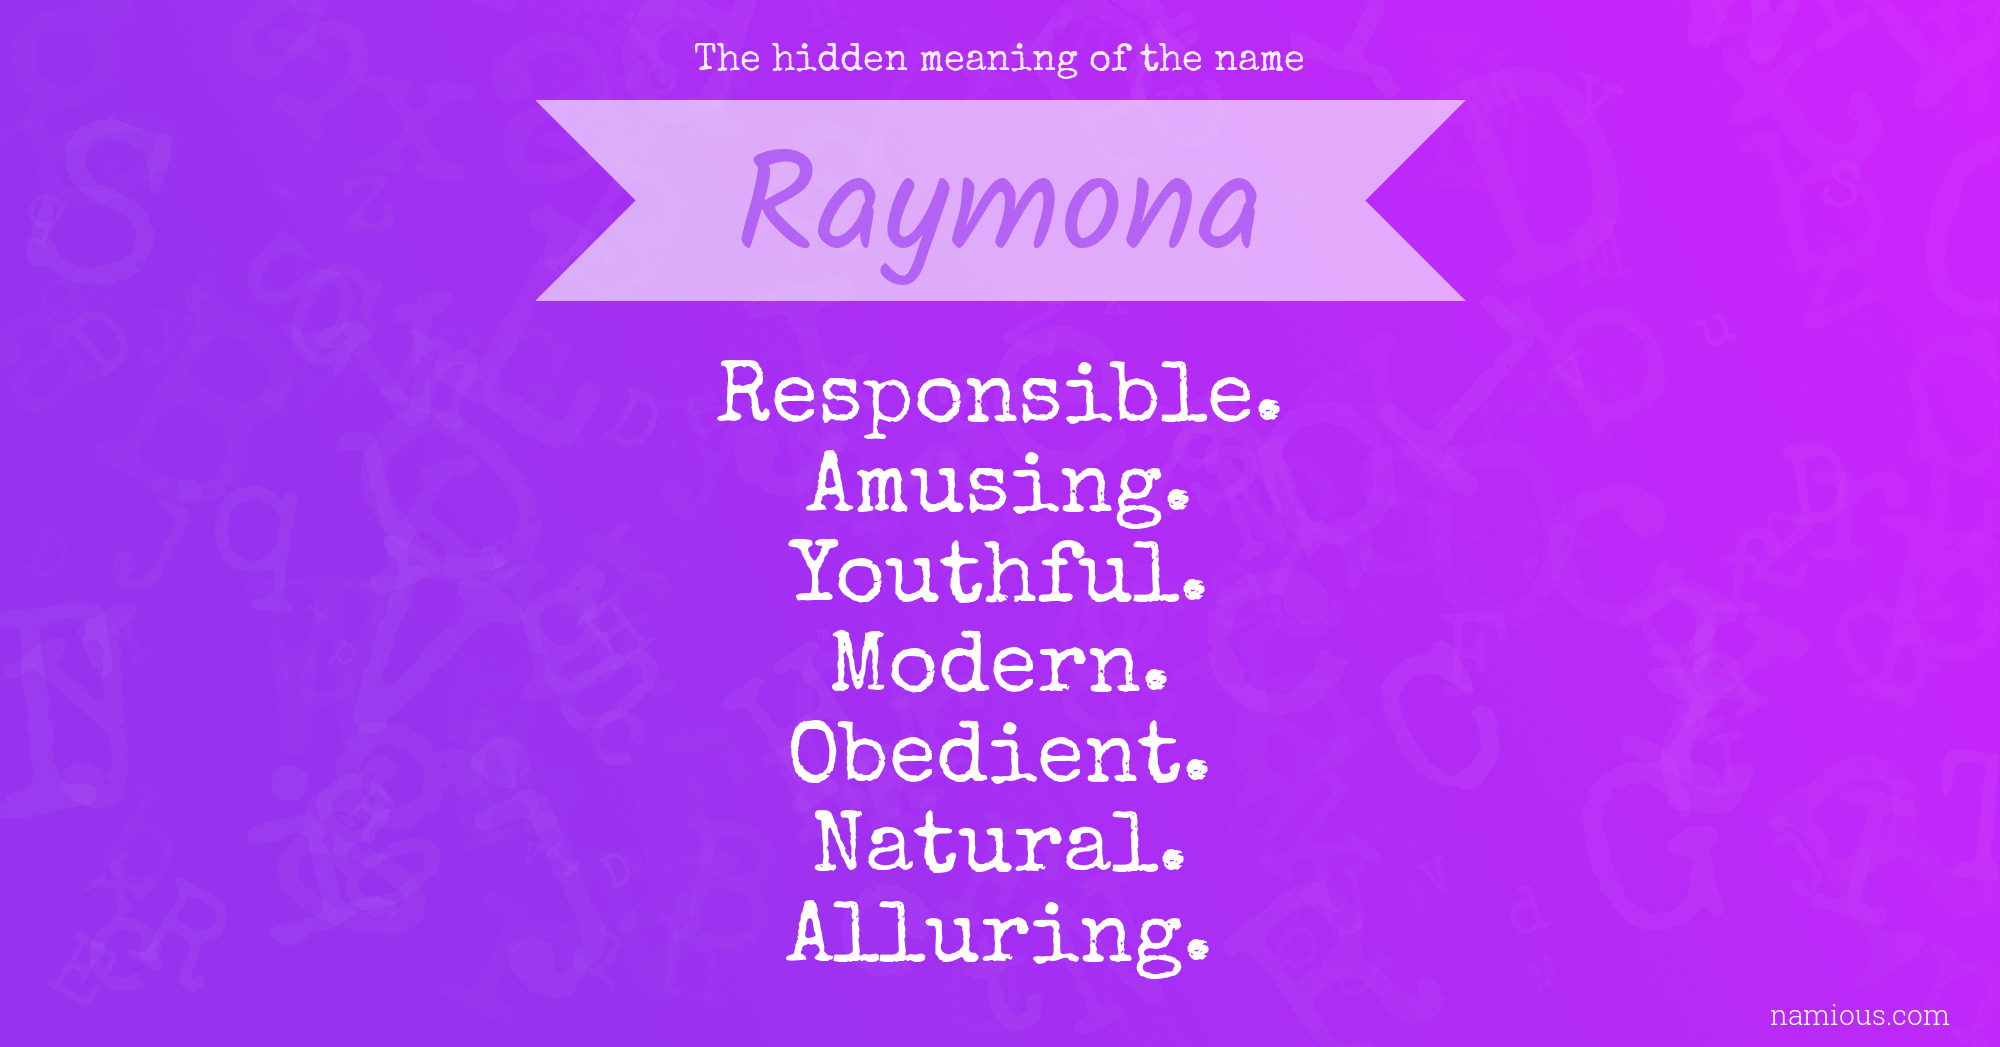 The hidden meaning of the name Raymona